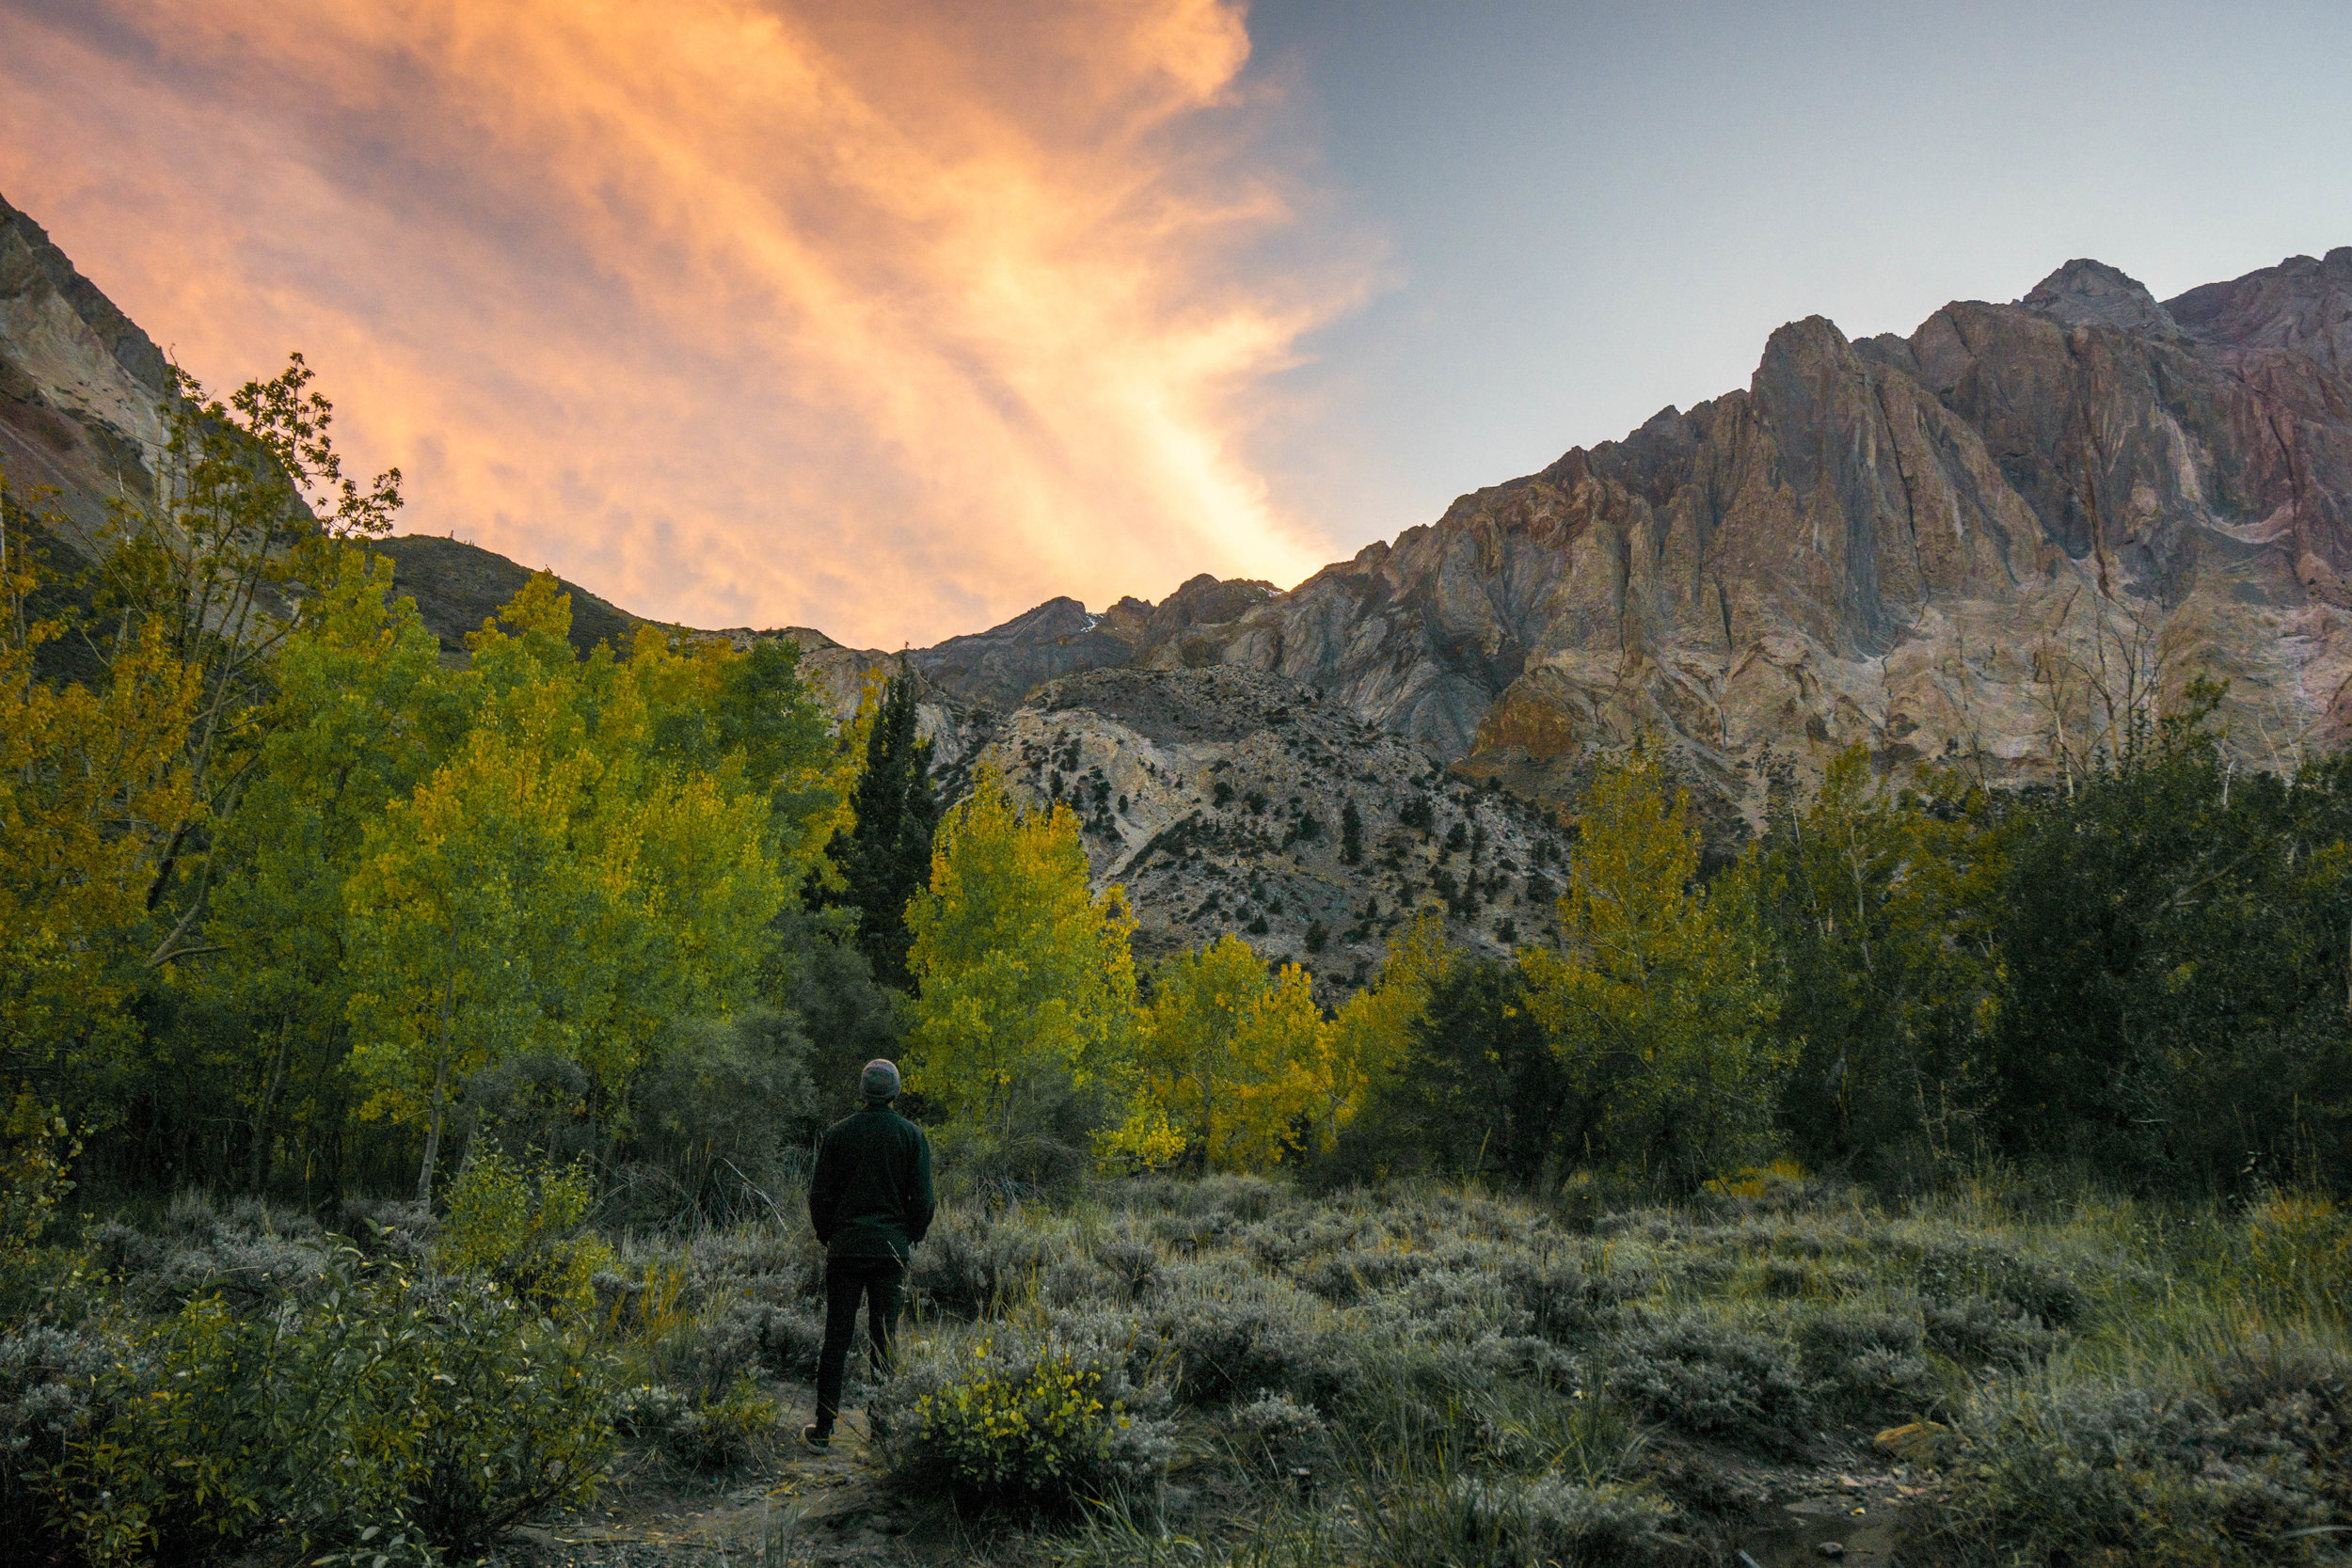 On our way back to camp we stop by a granite canyon for the tail-end of sunset. Wasn't much later when we hopped in our tent, worn out from the day's misadventures.